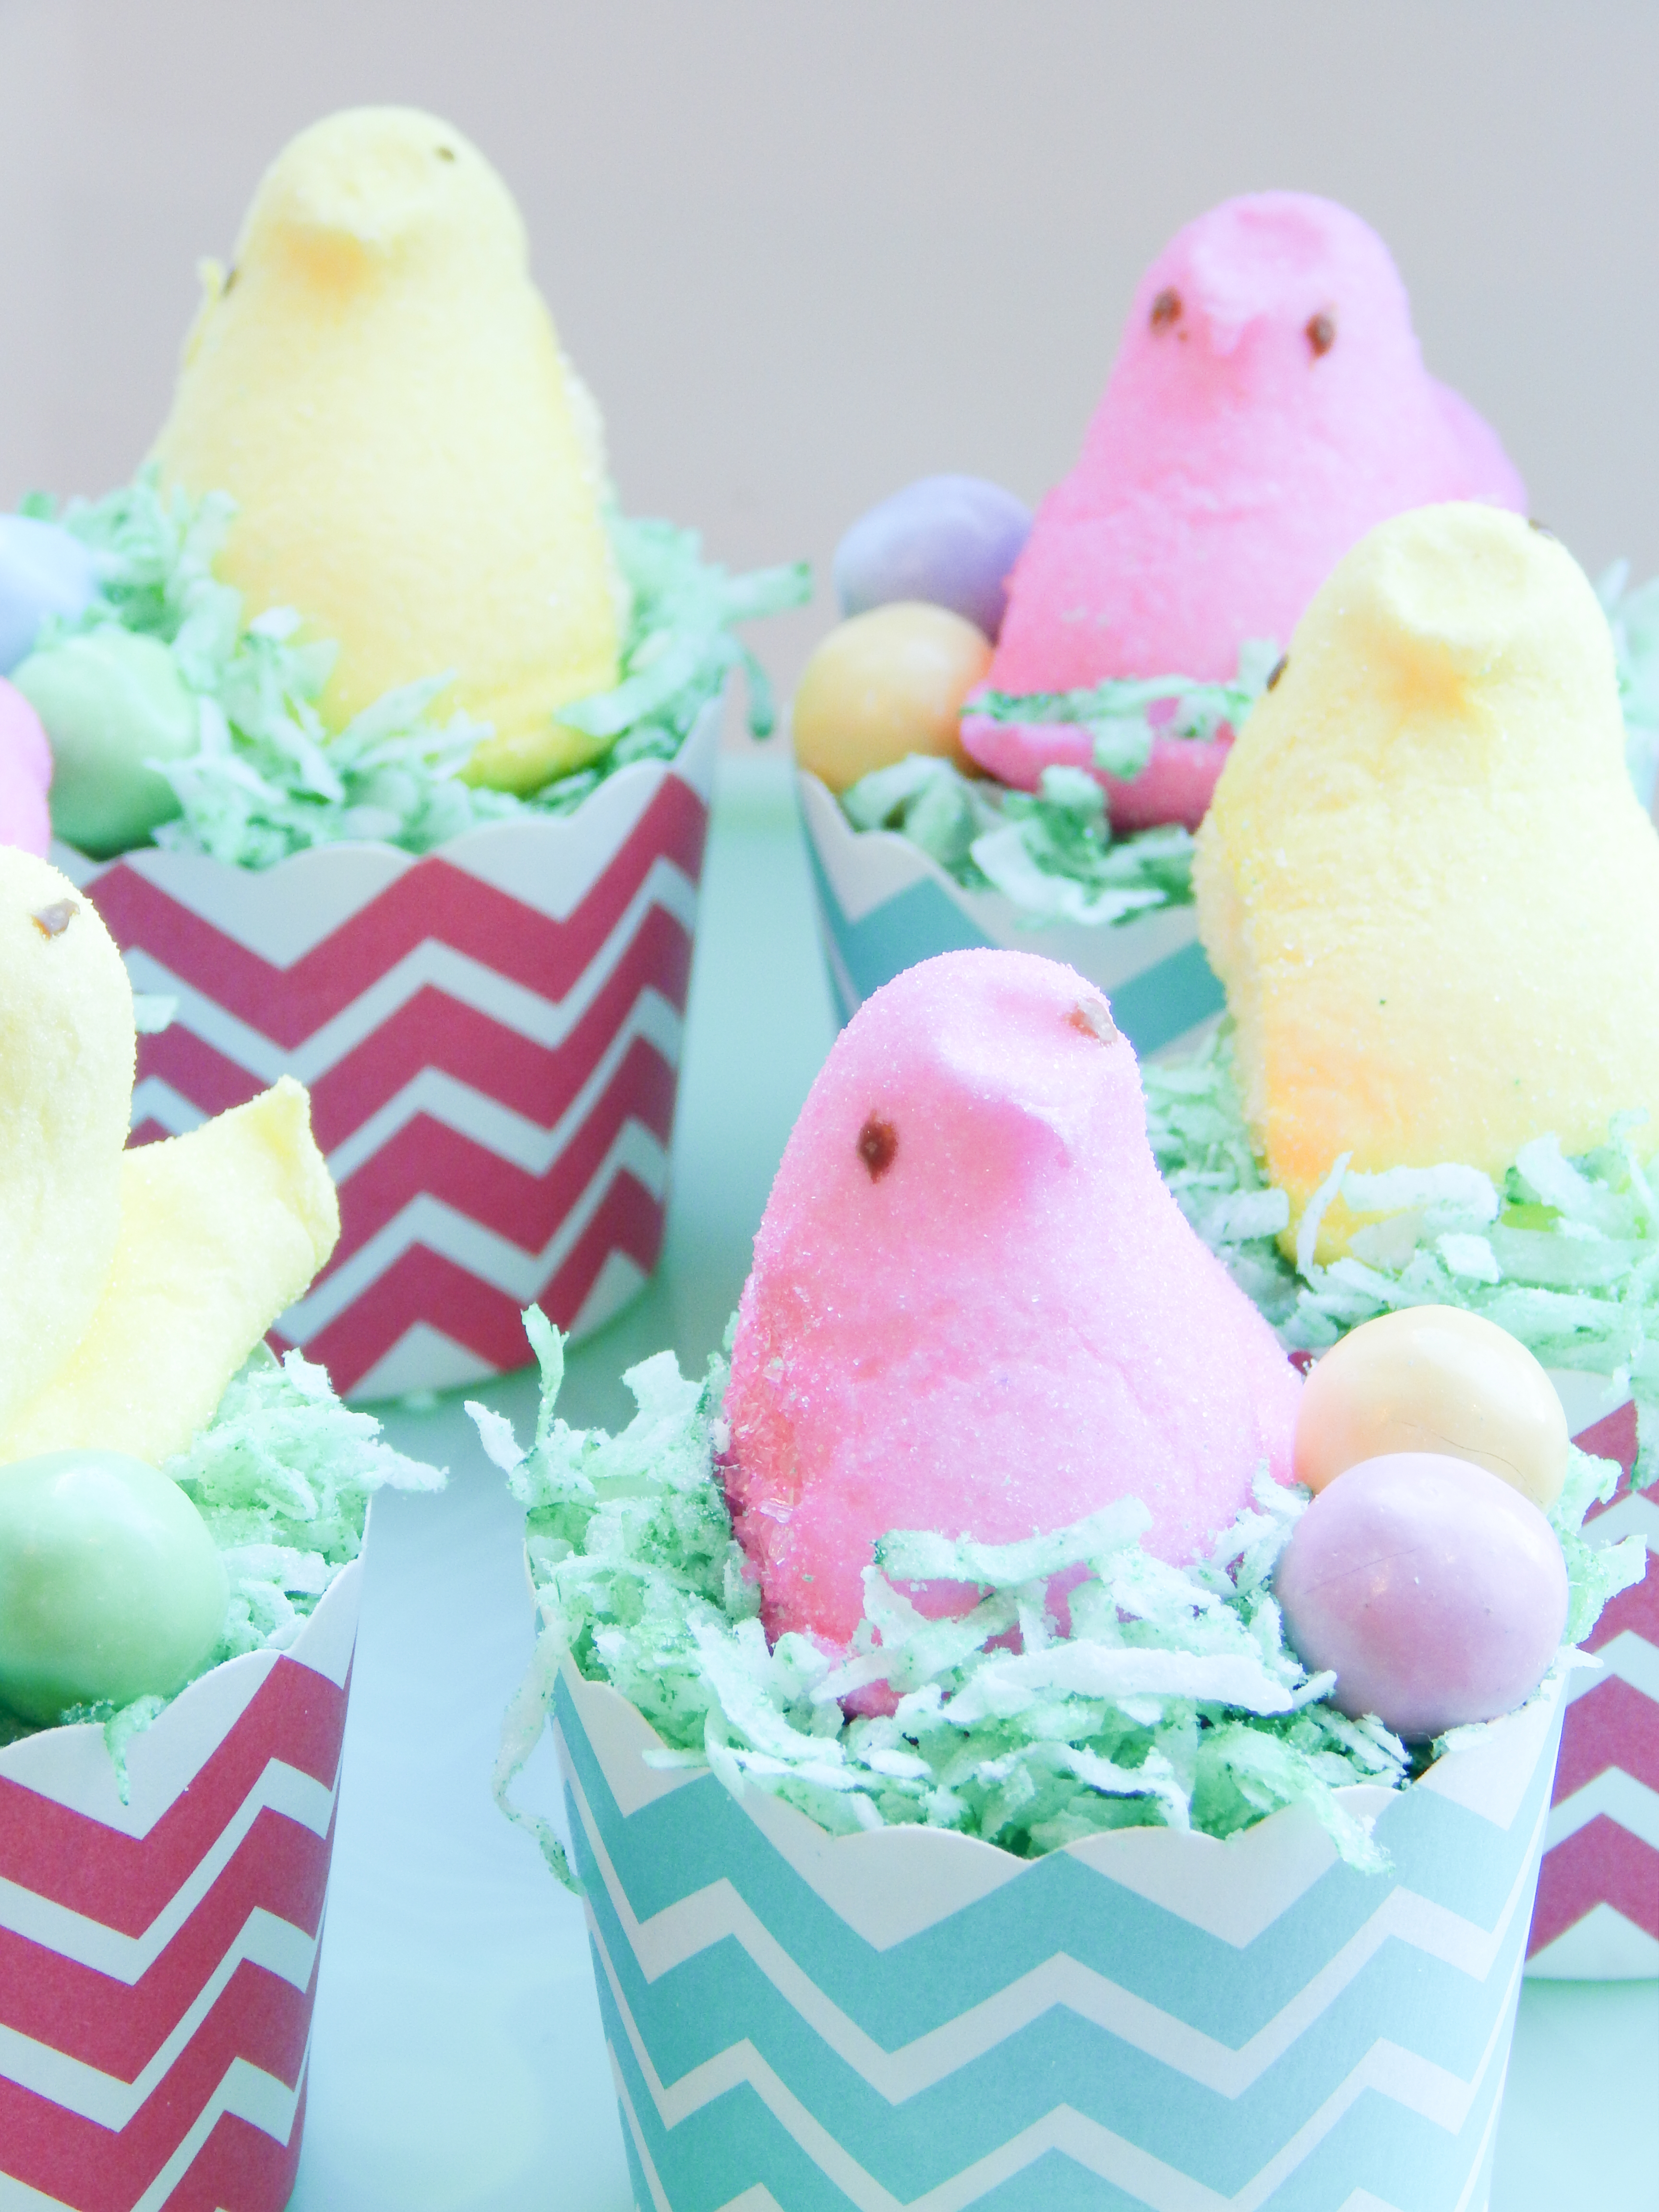 30 of the Best Easter Recipes & DIY Ideas - Roxy's Kitchen - Nesting Peeps Cupcakes